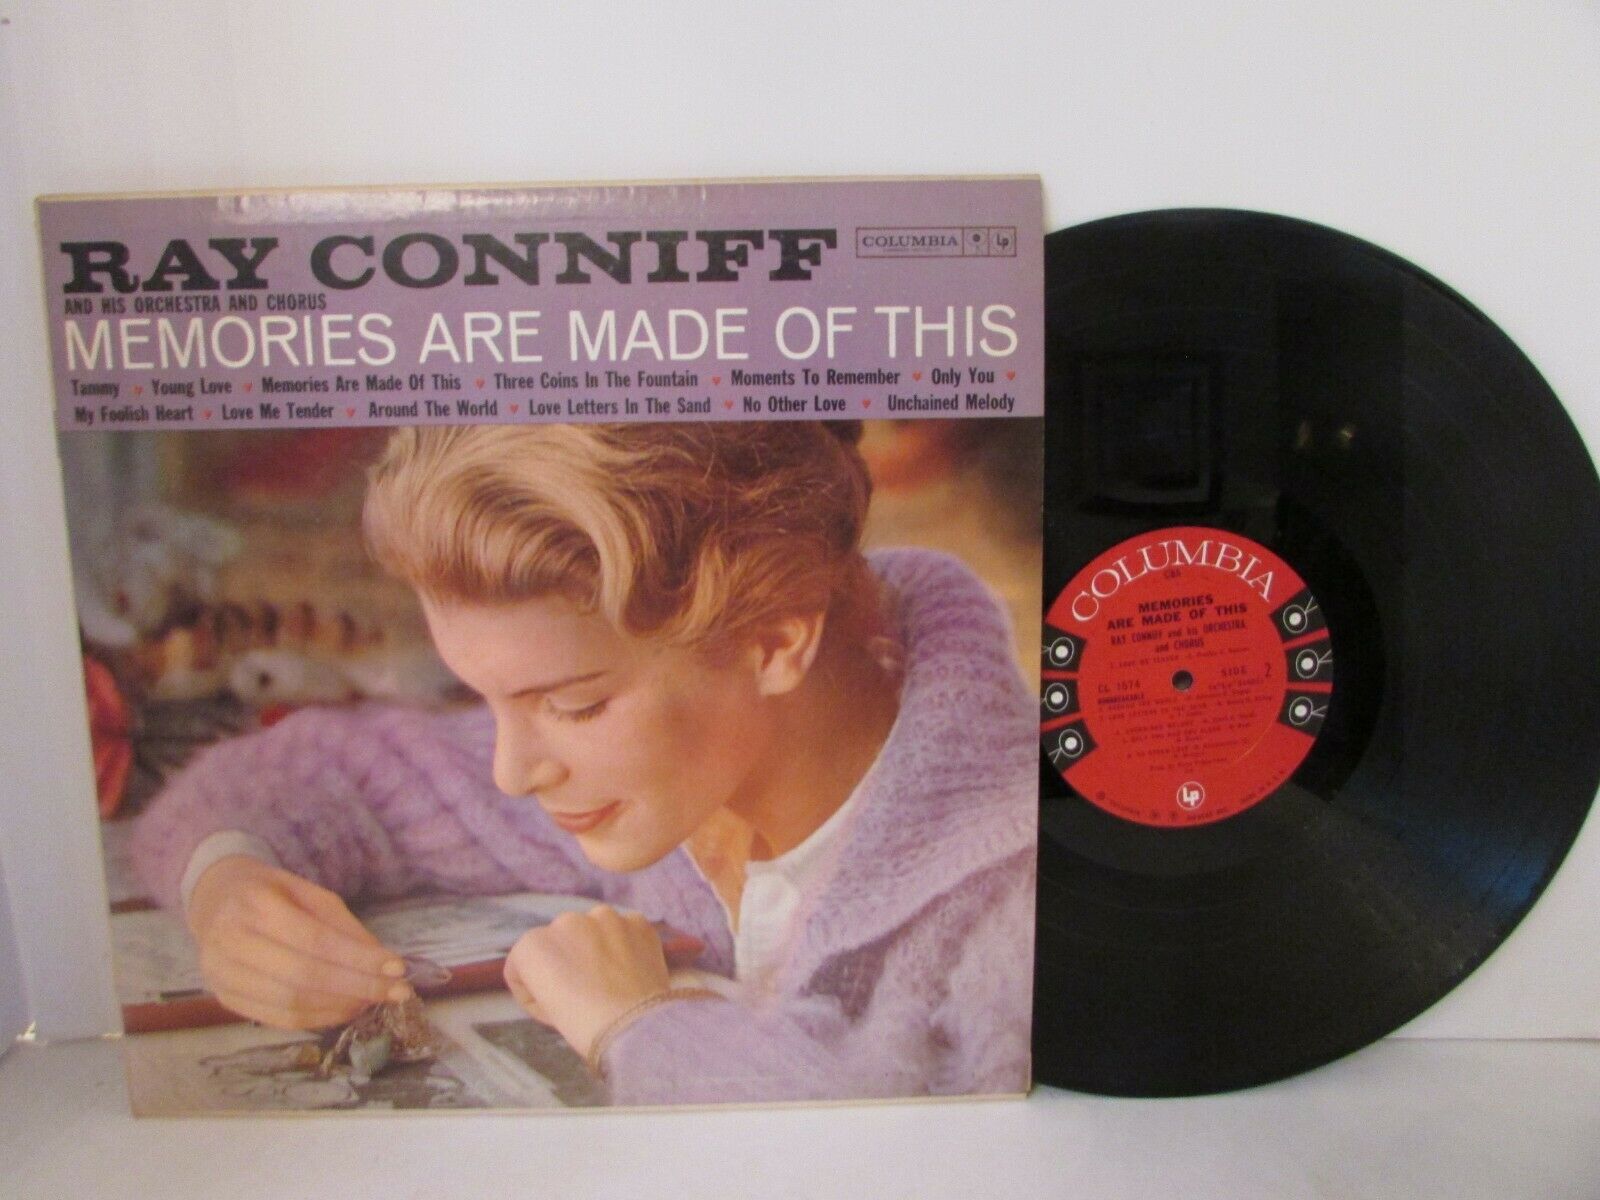 Primary image for MEMORIES ARE MADE OF THIS RAY CONNIFF COLUMBIA 1574  33RPM RECORD ALBUM   L114C